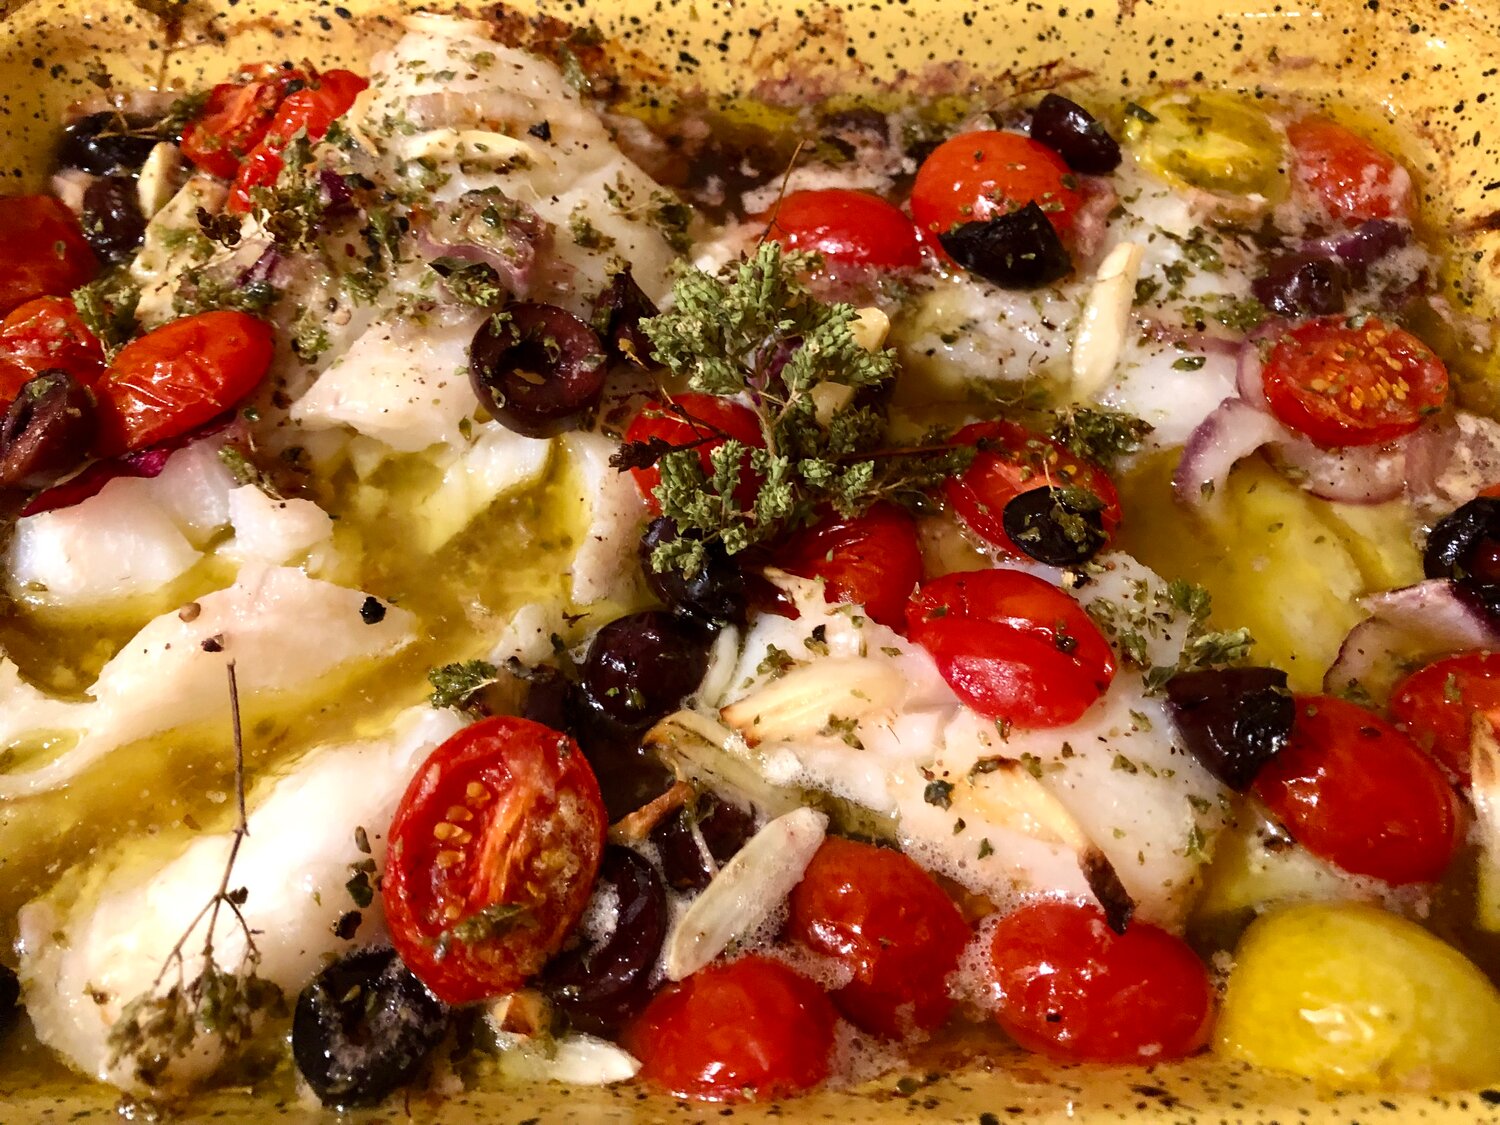 Mediterranean Baked Cod is a quick, colorful and delicious weeknight preparation enhanced by onions, olives, garlic and tomatoes.